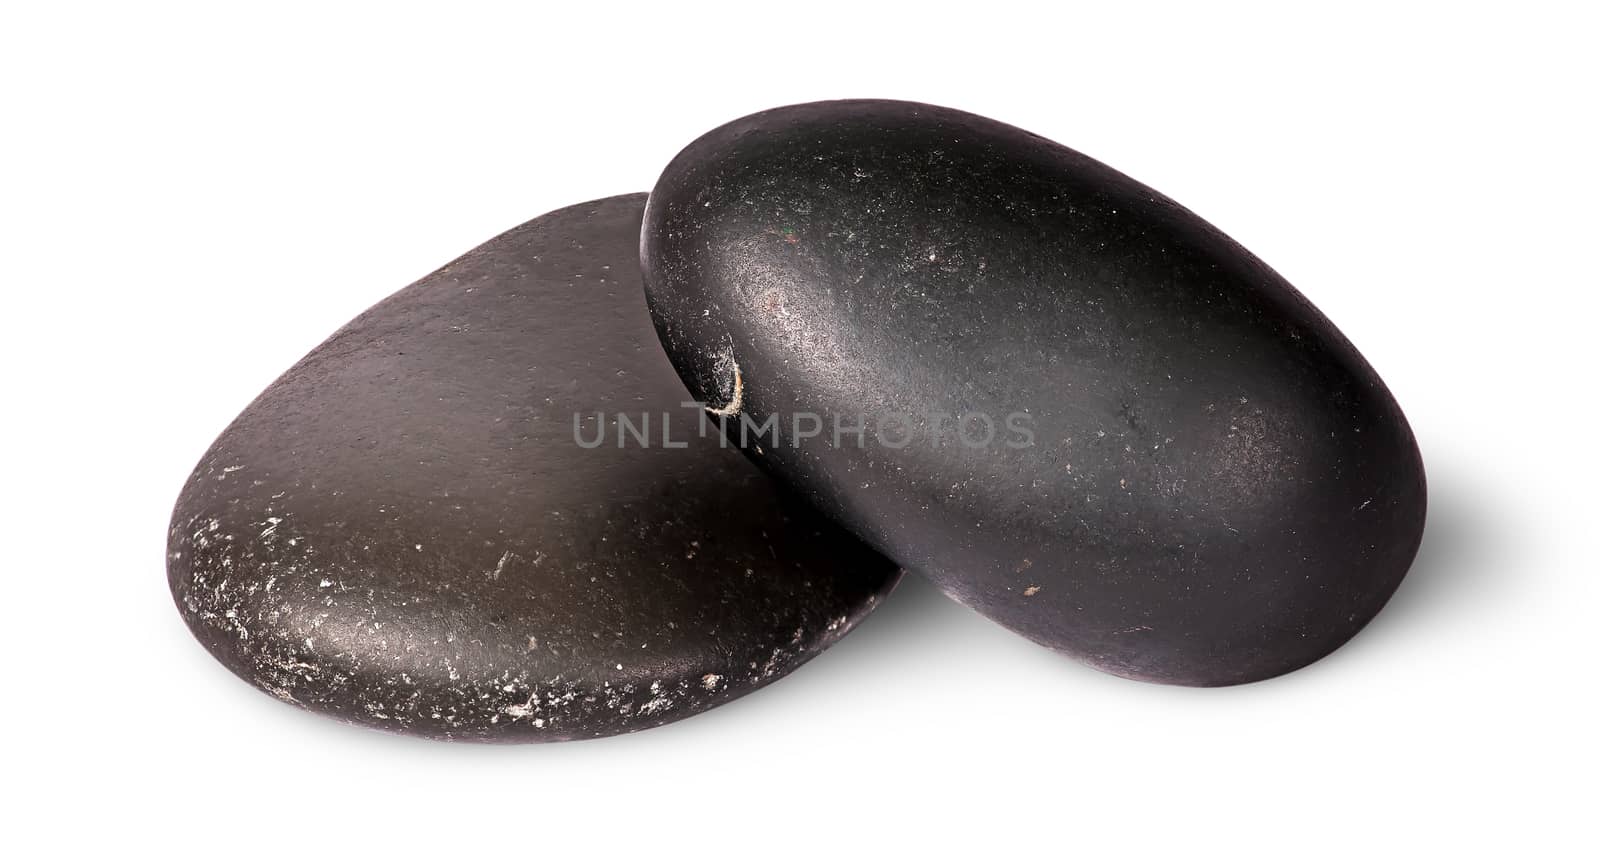 On top two black stones for Thai spa by Cipariss